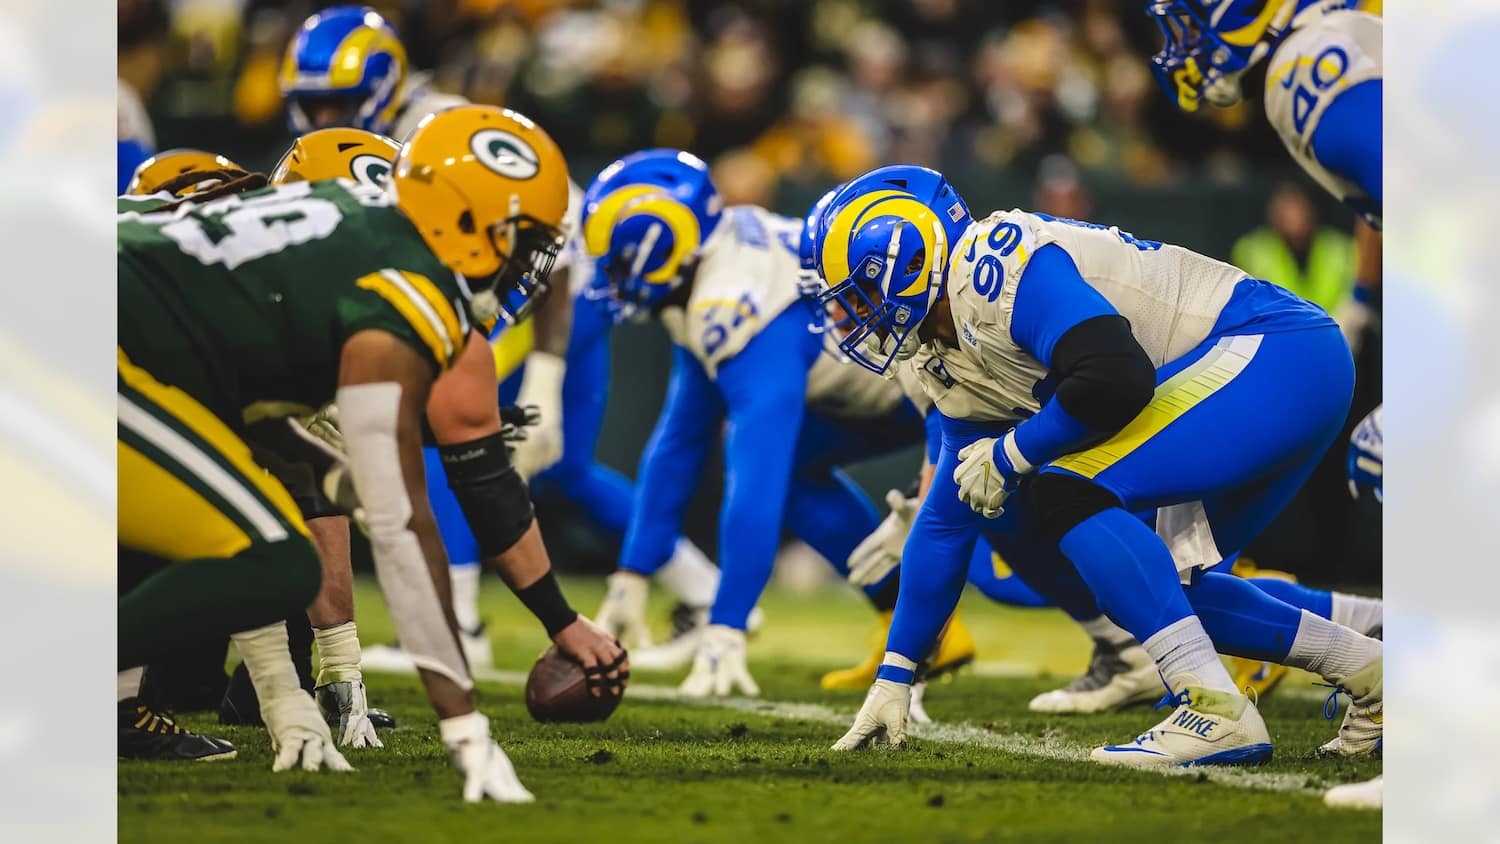 Los Angeles Rams Take On The Green Bay Packers. Photo Credit: Brevin Townsell | LA Rams